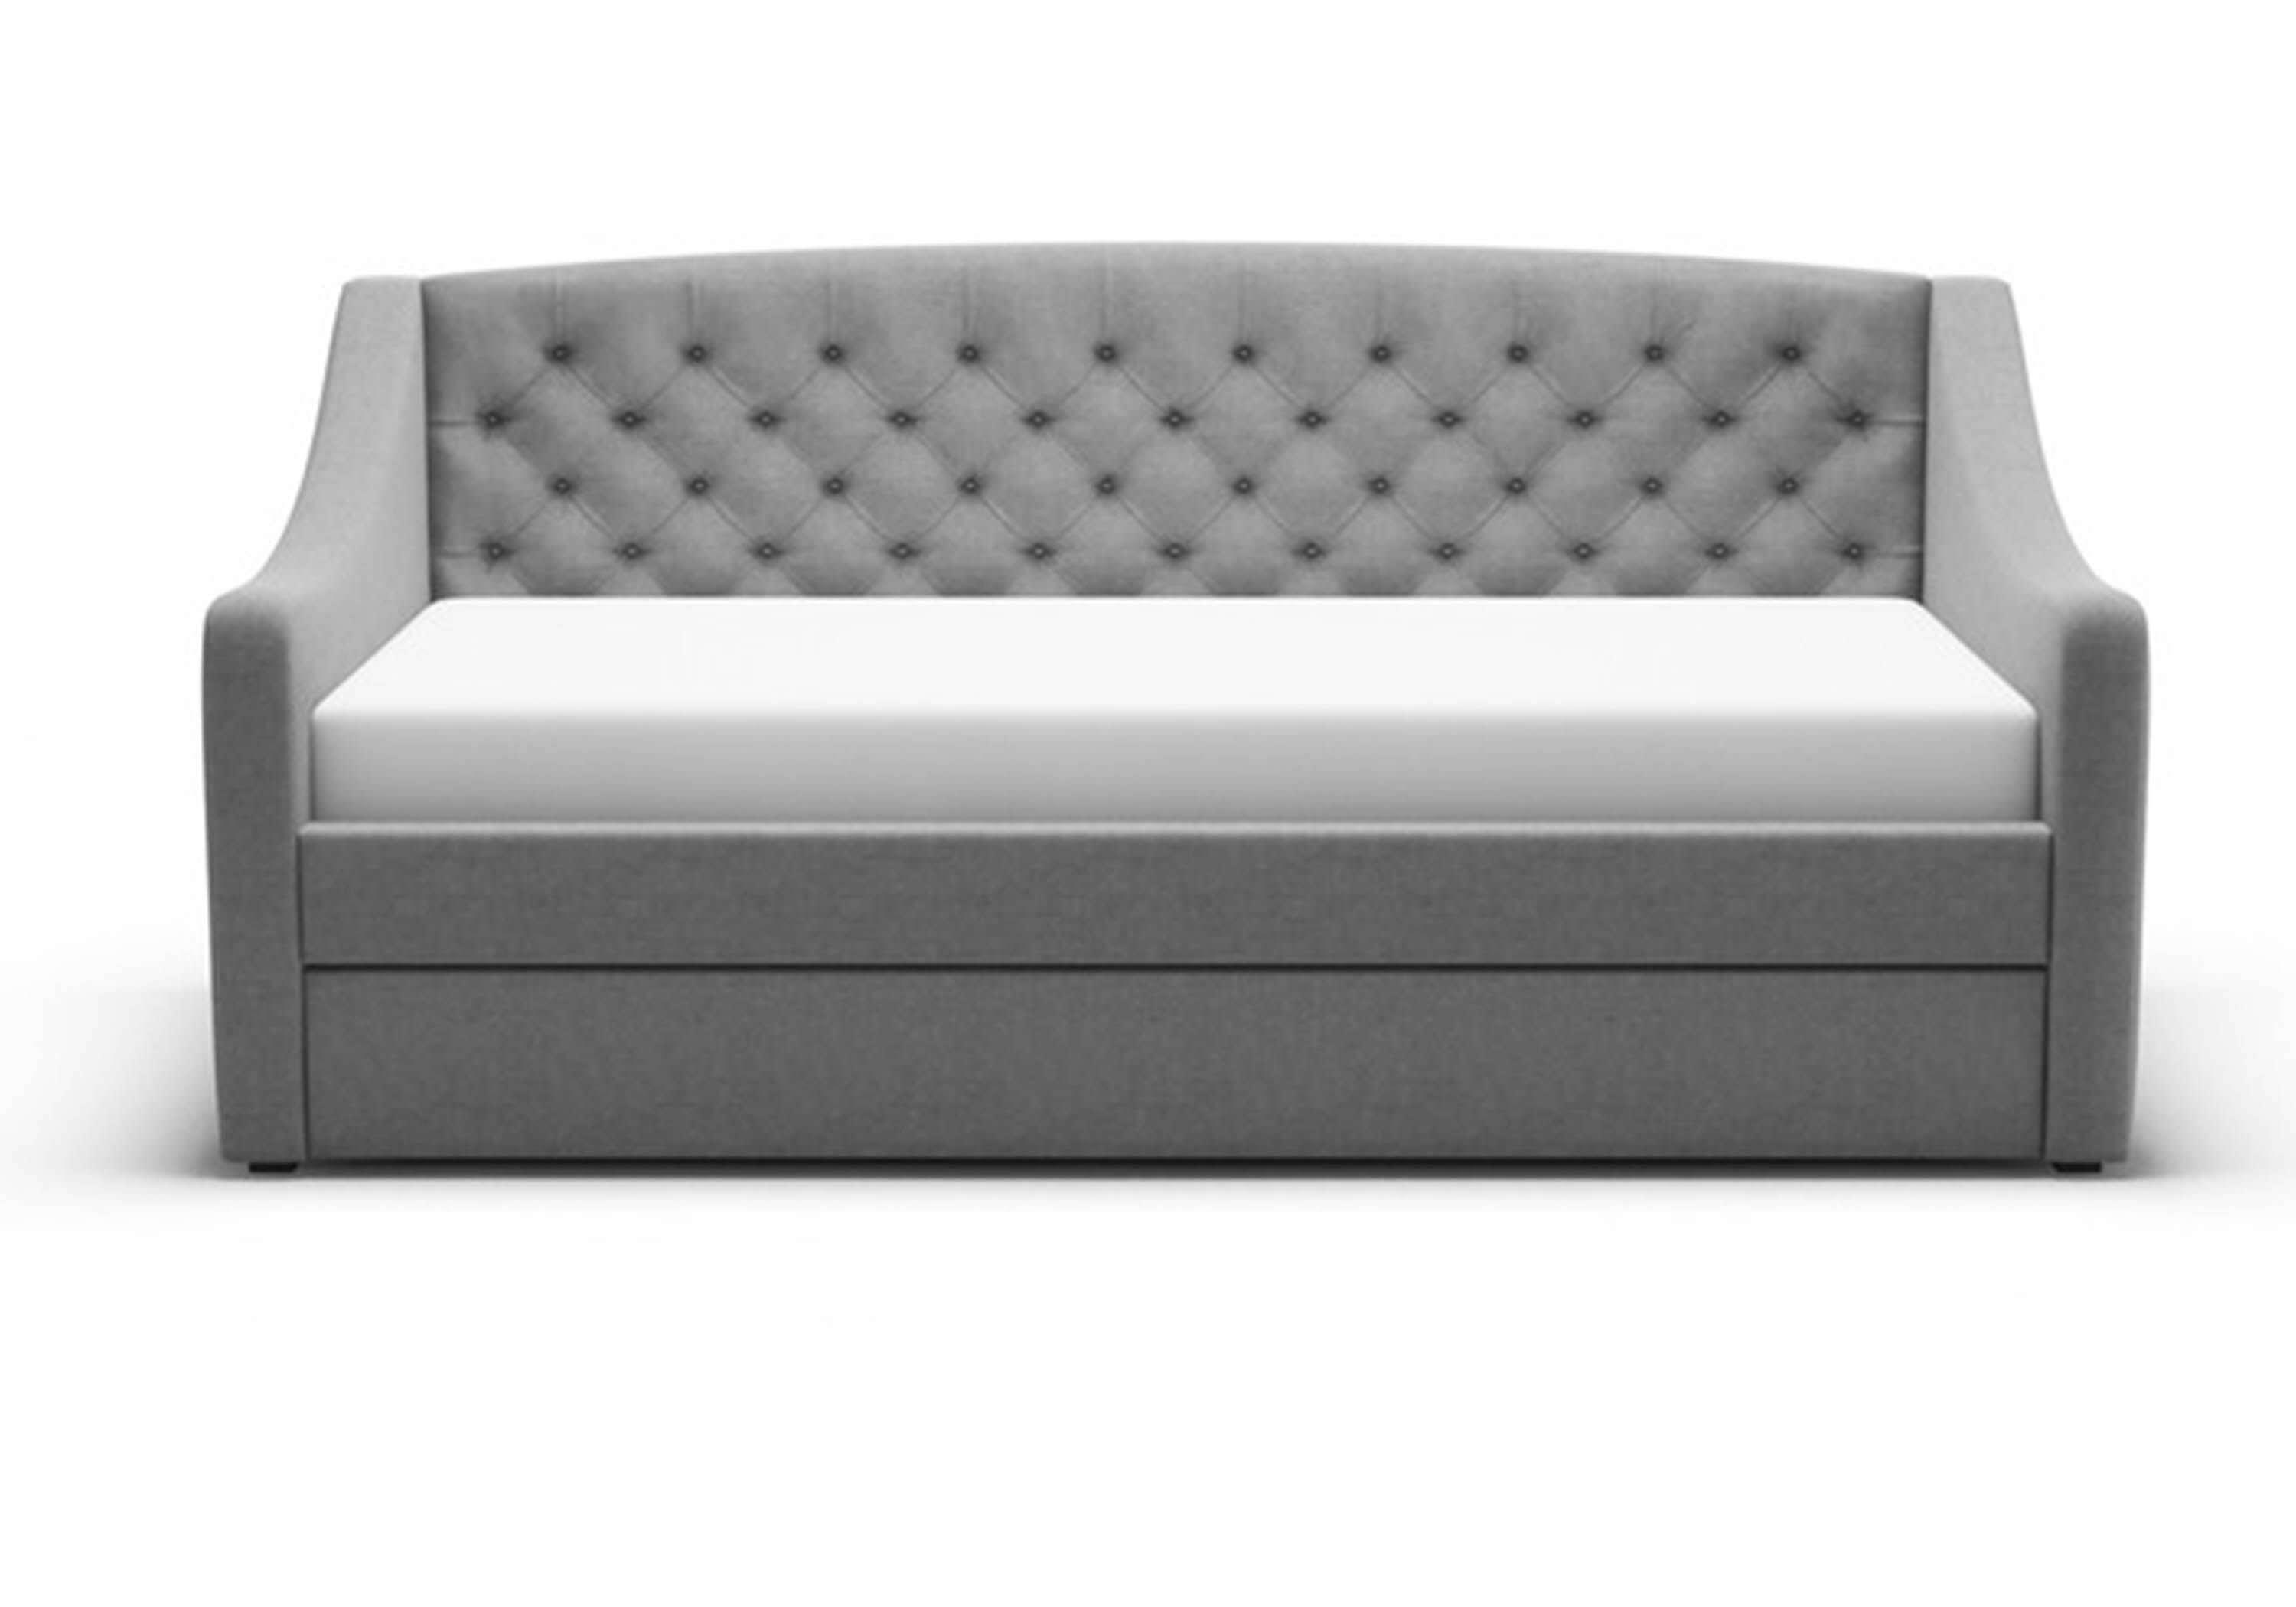 Aurora Studded Grey Single Daybed Frame 3 View